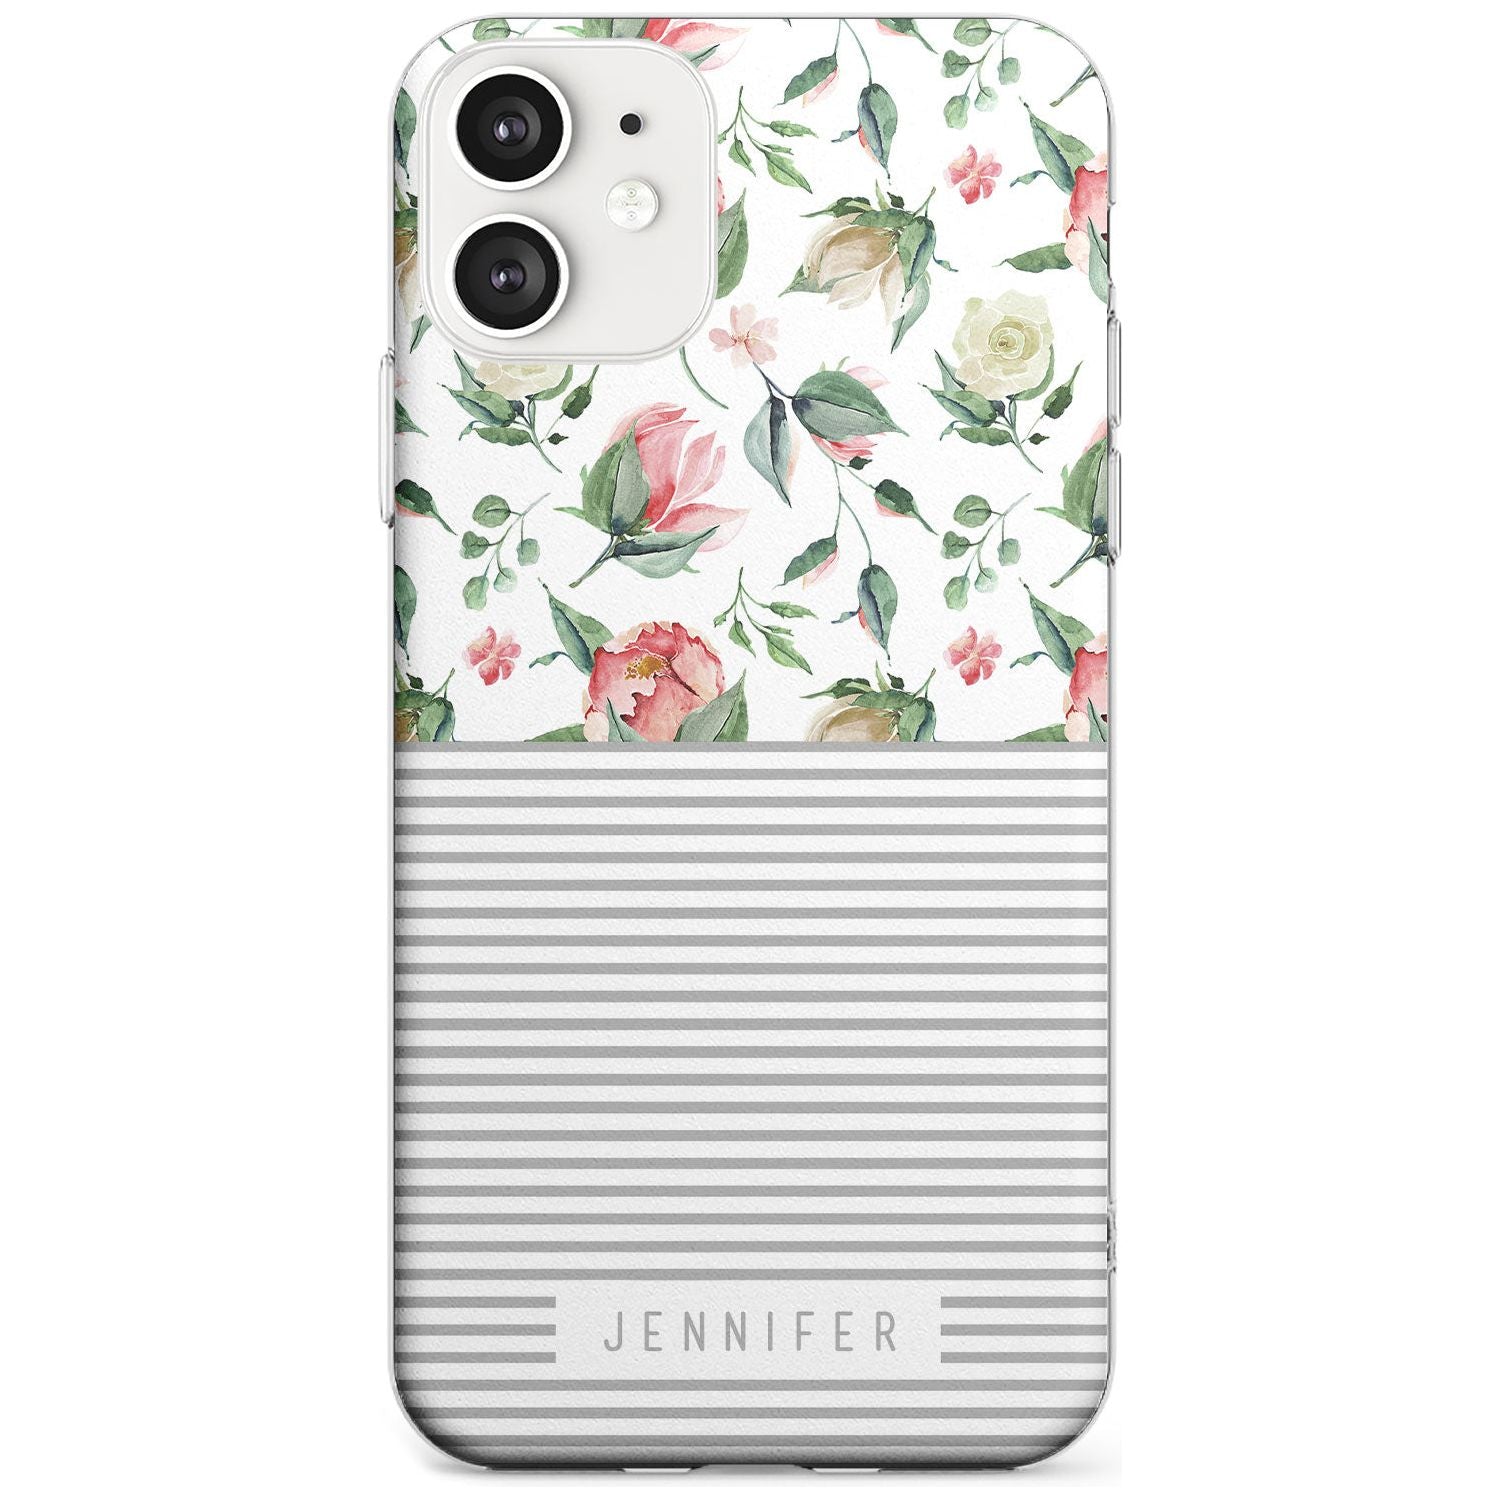 Light Floral Pattern & Stripes Black Impact Phone Case for iPhone 11